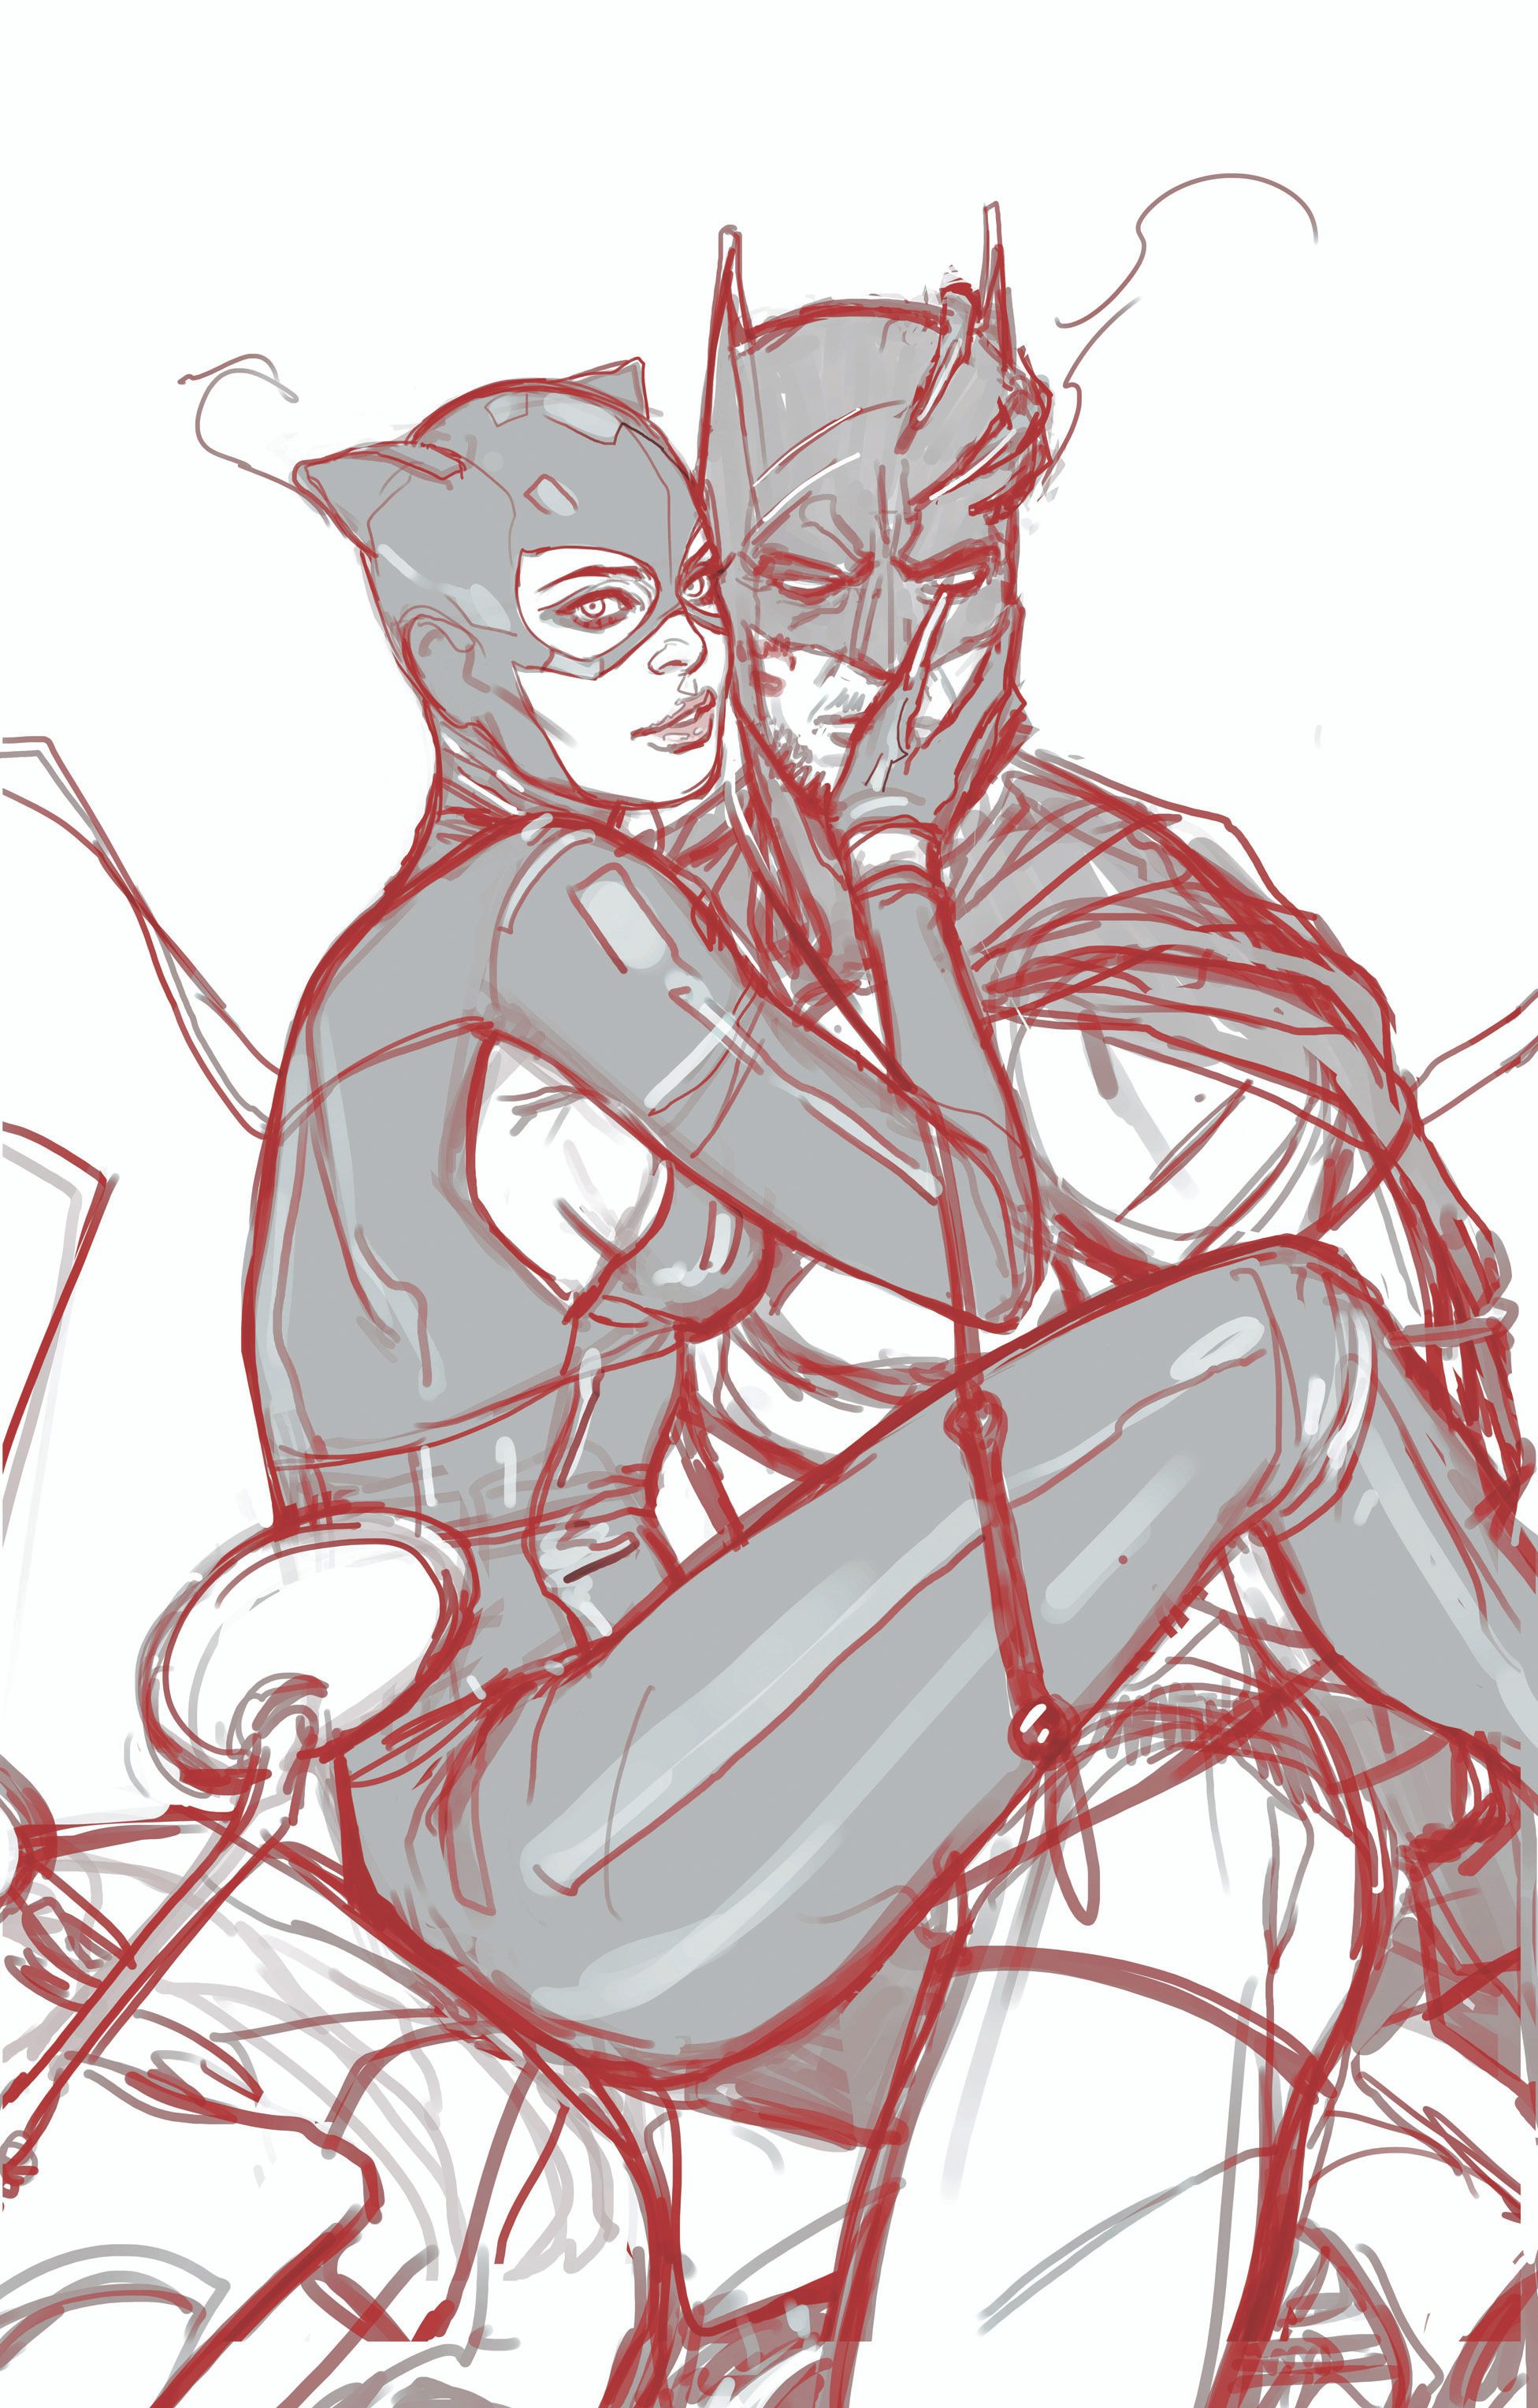 Catwoman 52 Open to Order Variant (Swaby) (WIP)